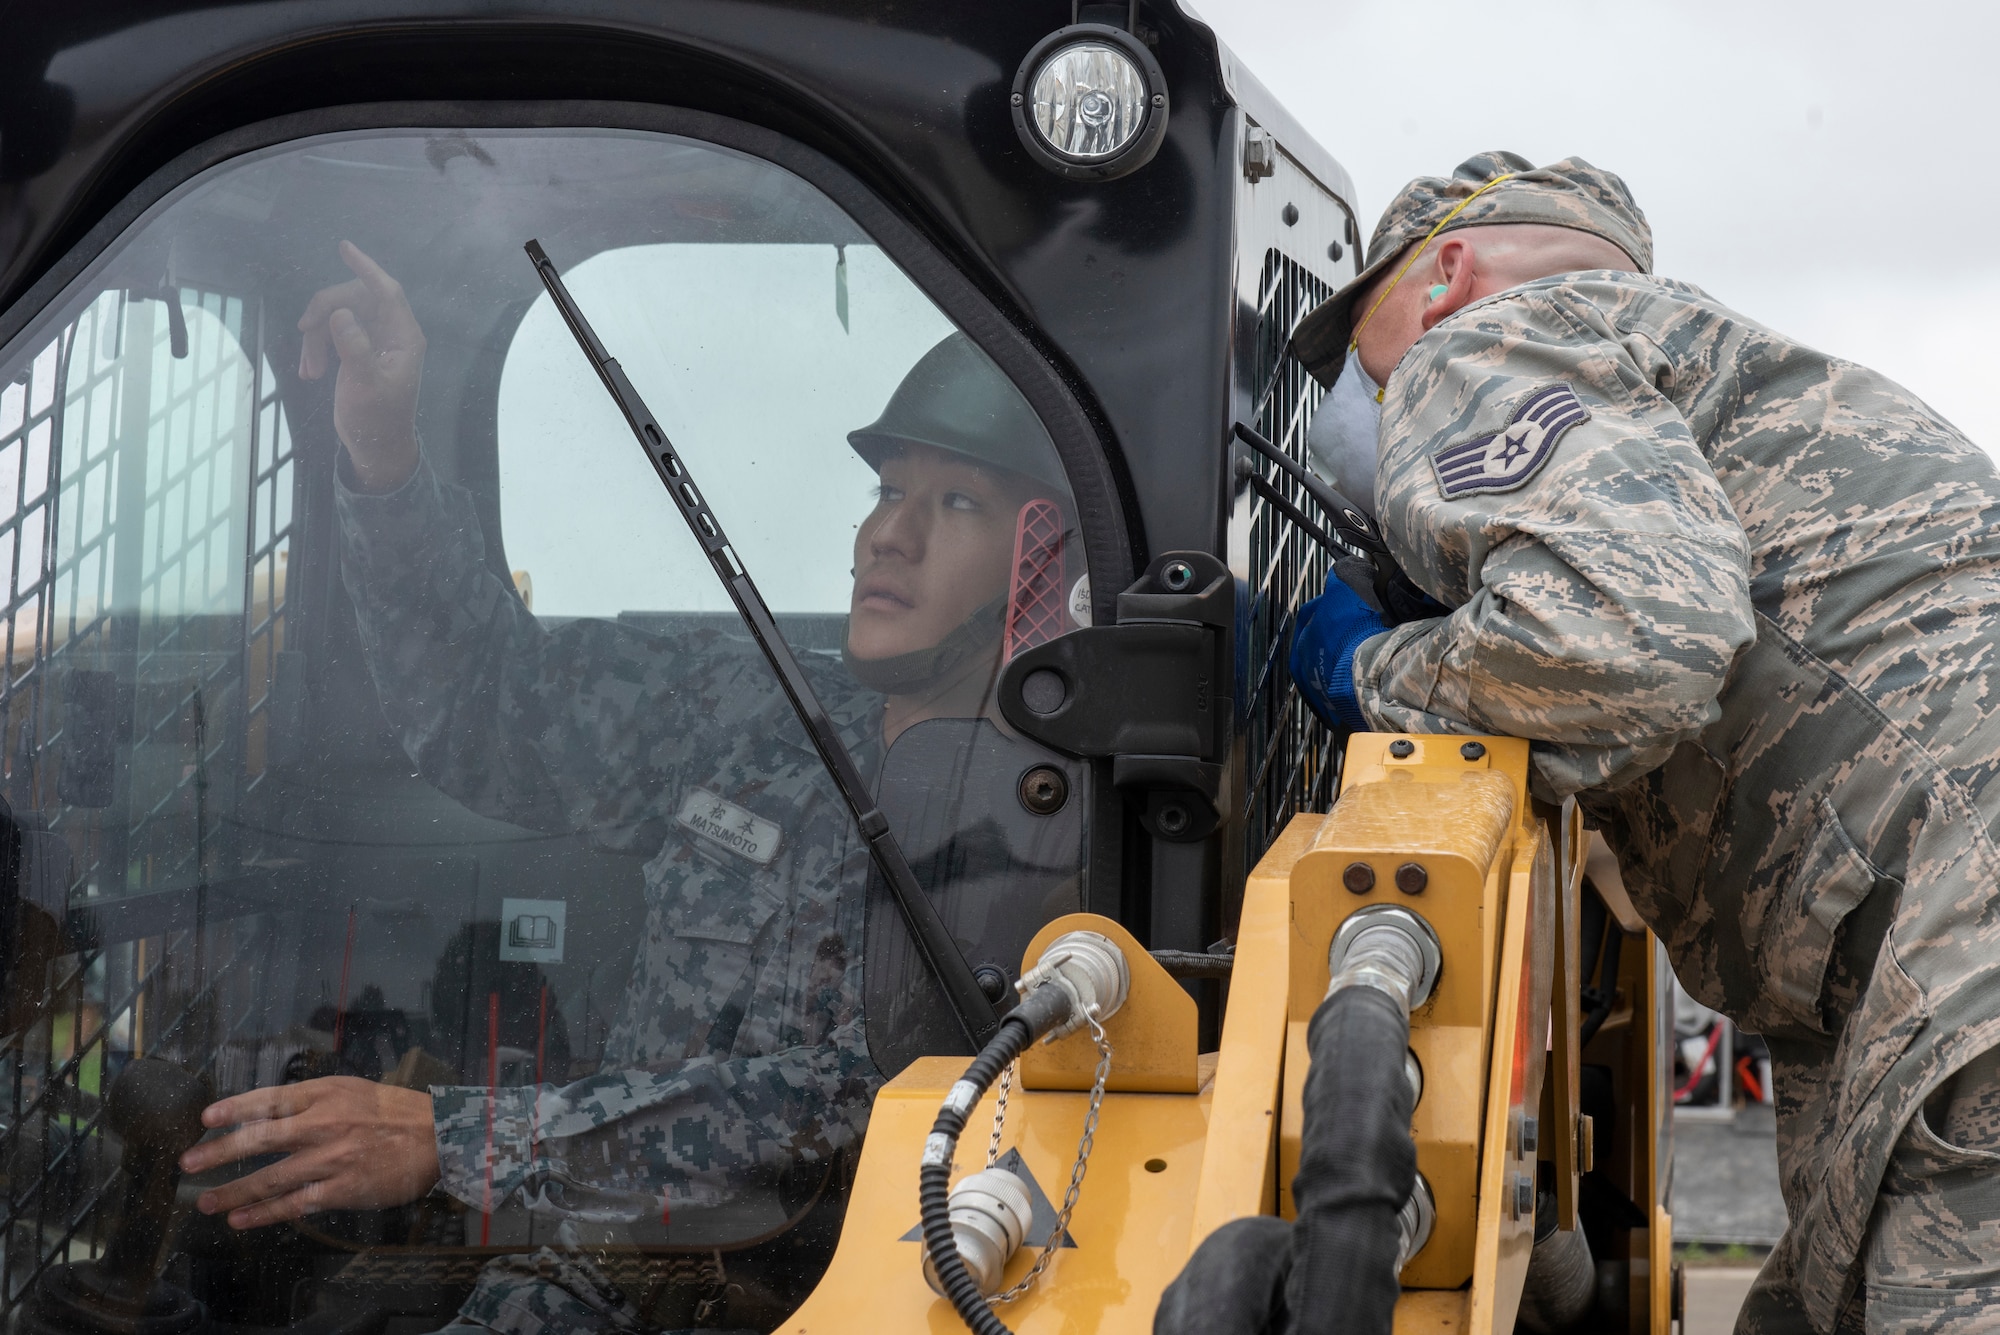 An Airman from the 374th Civil Engineer Squadron communicates with his Japan Air Self-Defense Force counterpart to better position equipment during the hands on portion of Pacific Unity 2019 at Yokota Air Base, Japan, August 22, 2019.